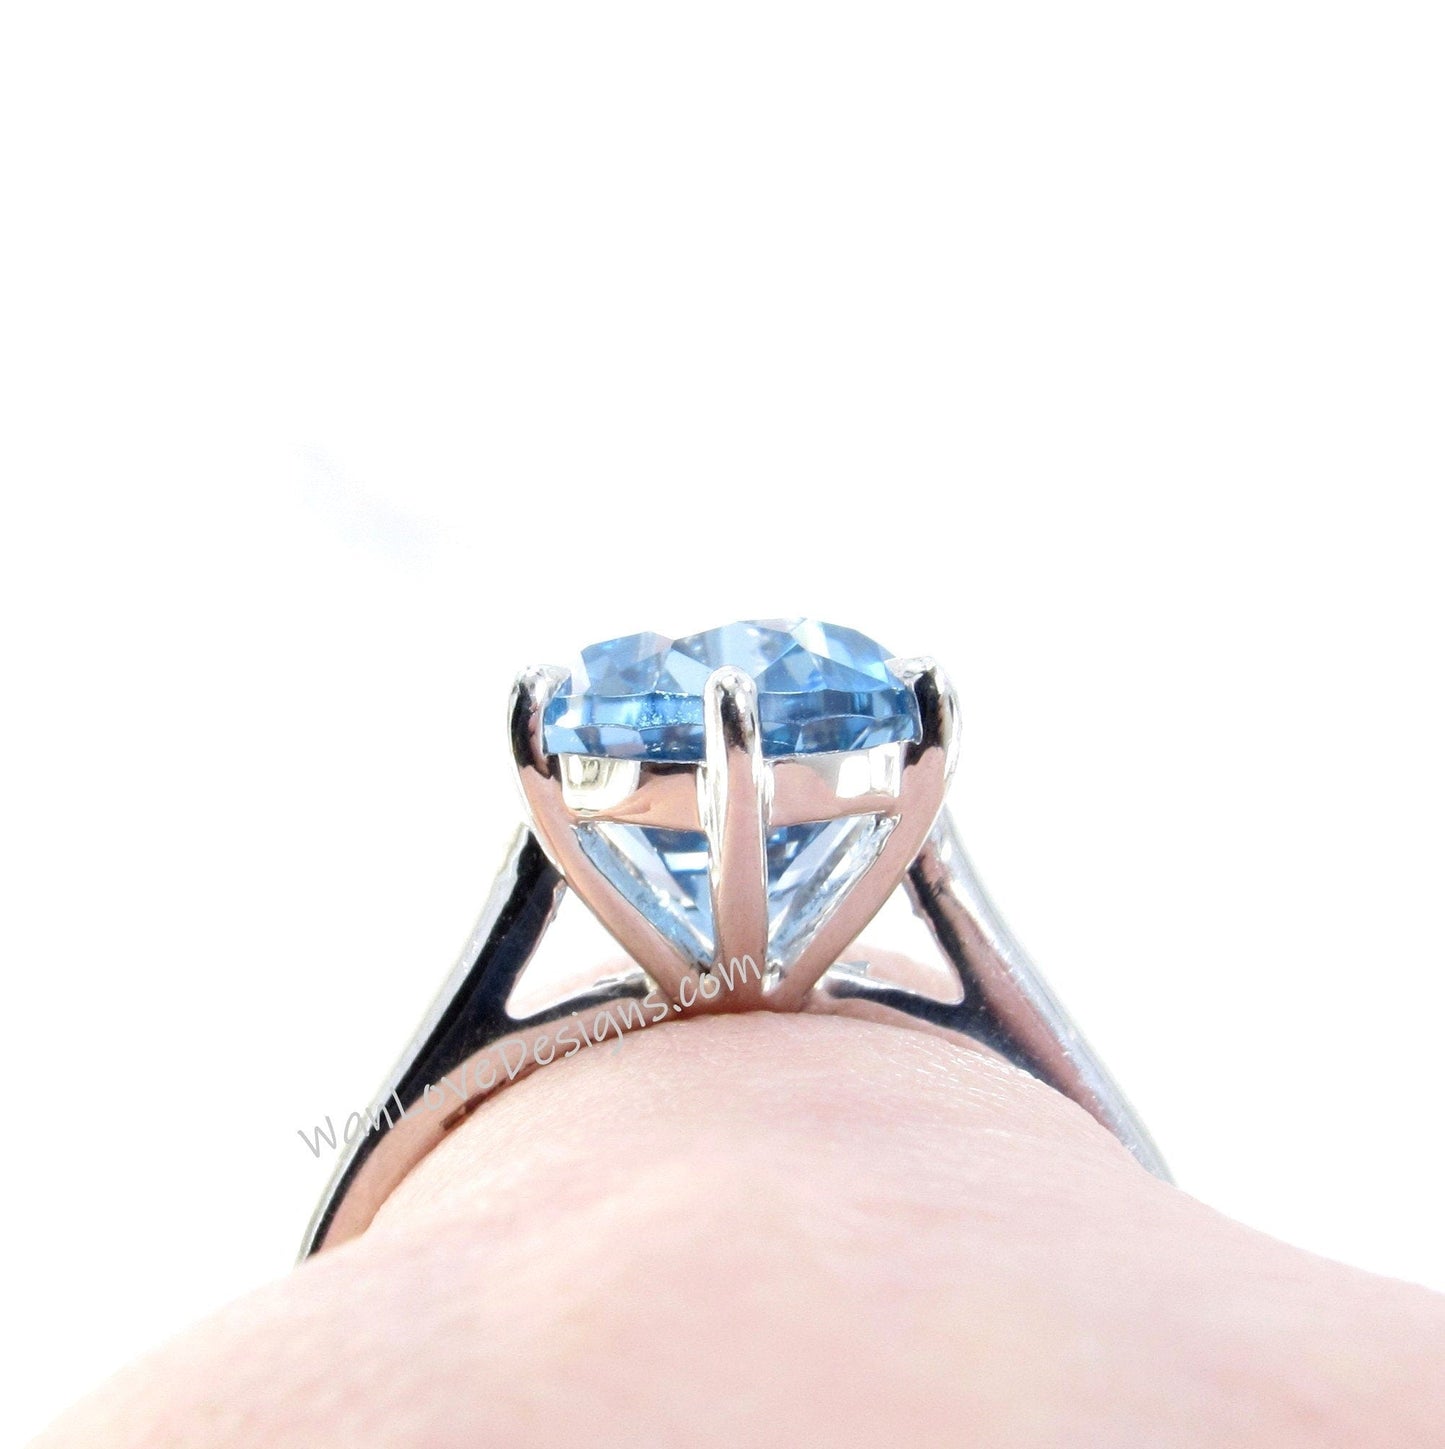 4.5ct Aquamarine Blue Spinel 6 Prong Pear Solitaire Engagement Ring, Large Gemstone Cathedral Ring, Wedding Anniversary Ring, Ready to ship Wan Love Designs